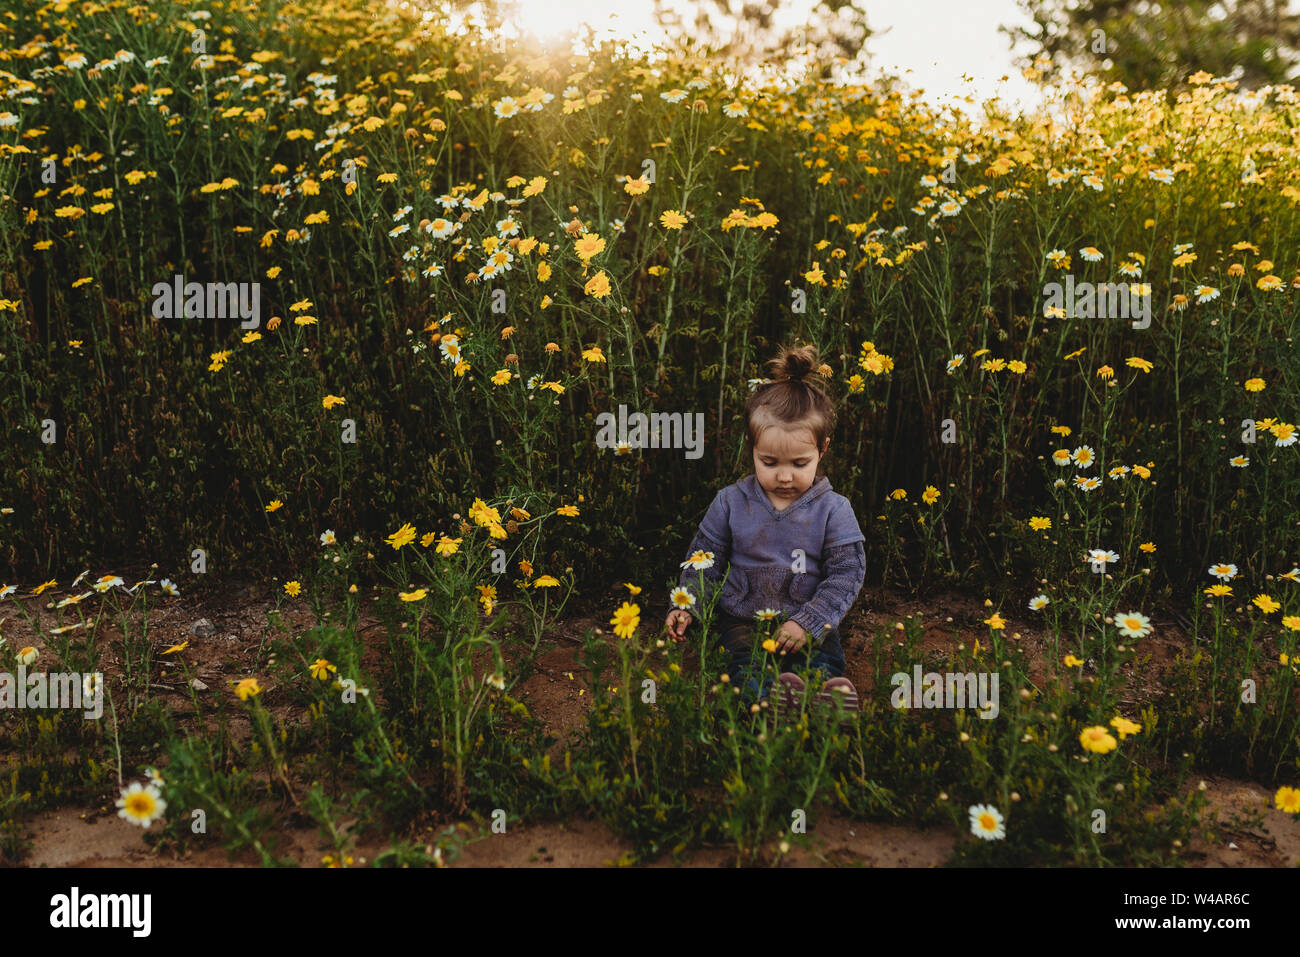 Toddler girl digging in dirt in field of flowers Stock Photo